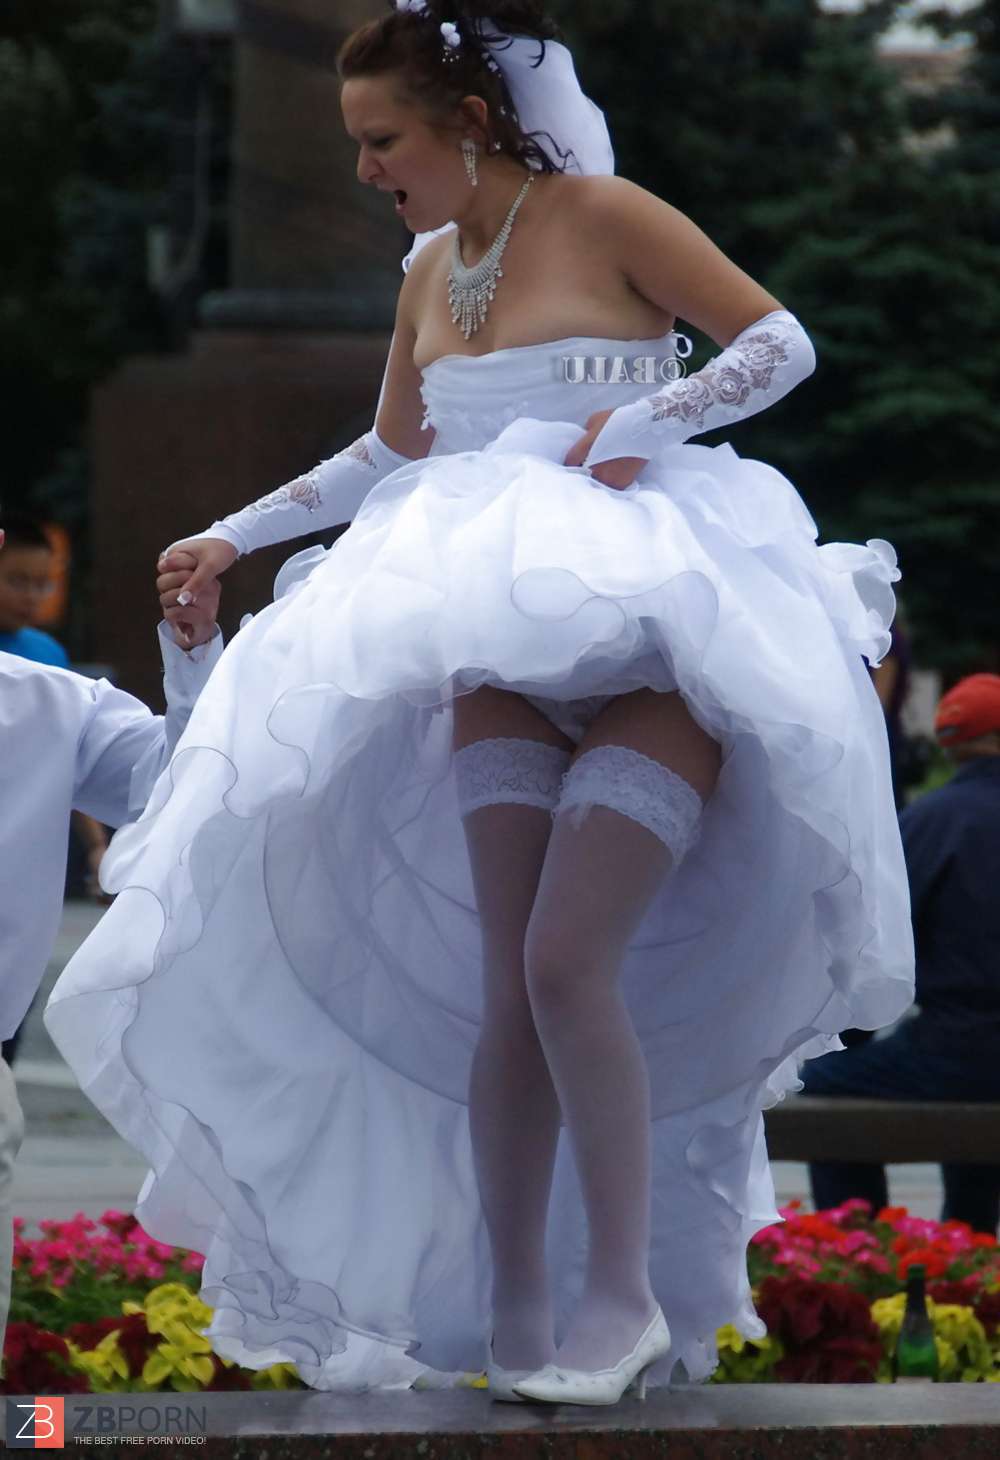 Free upskirt wedding pictures pic picture